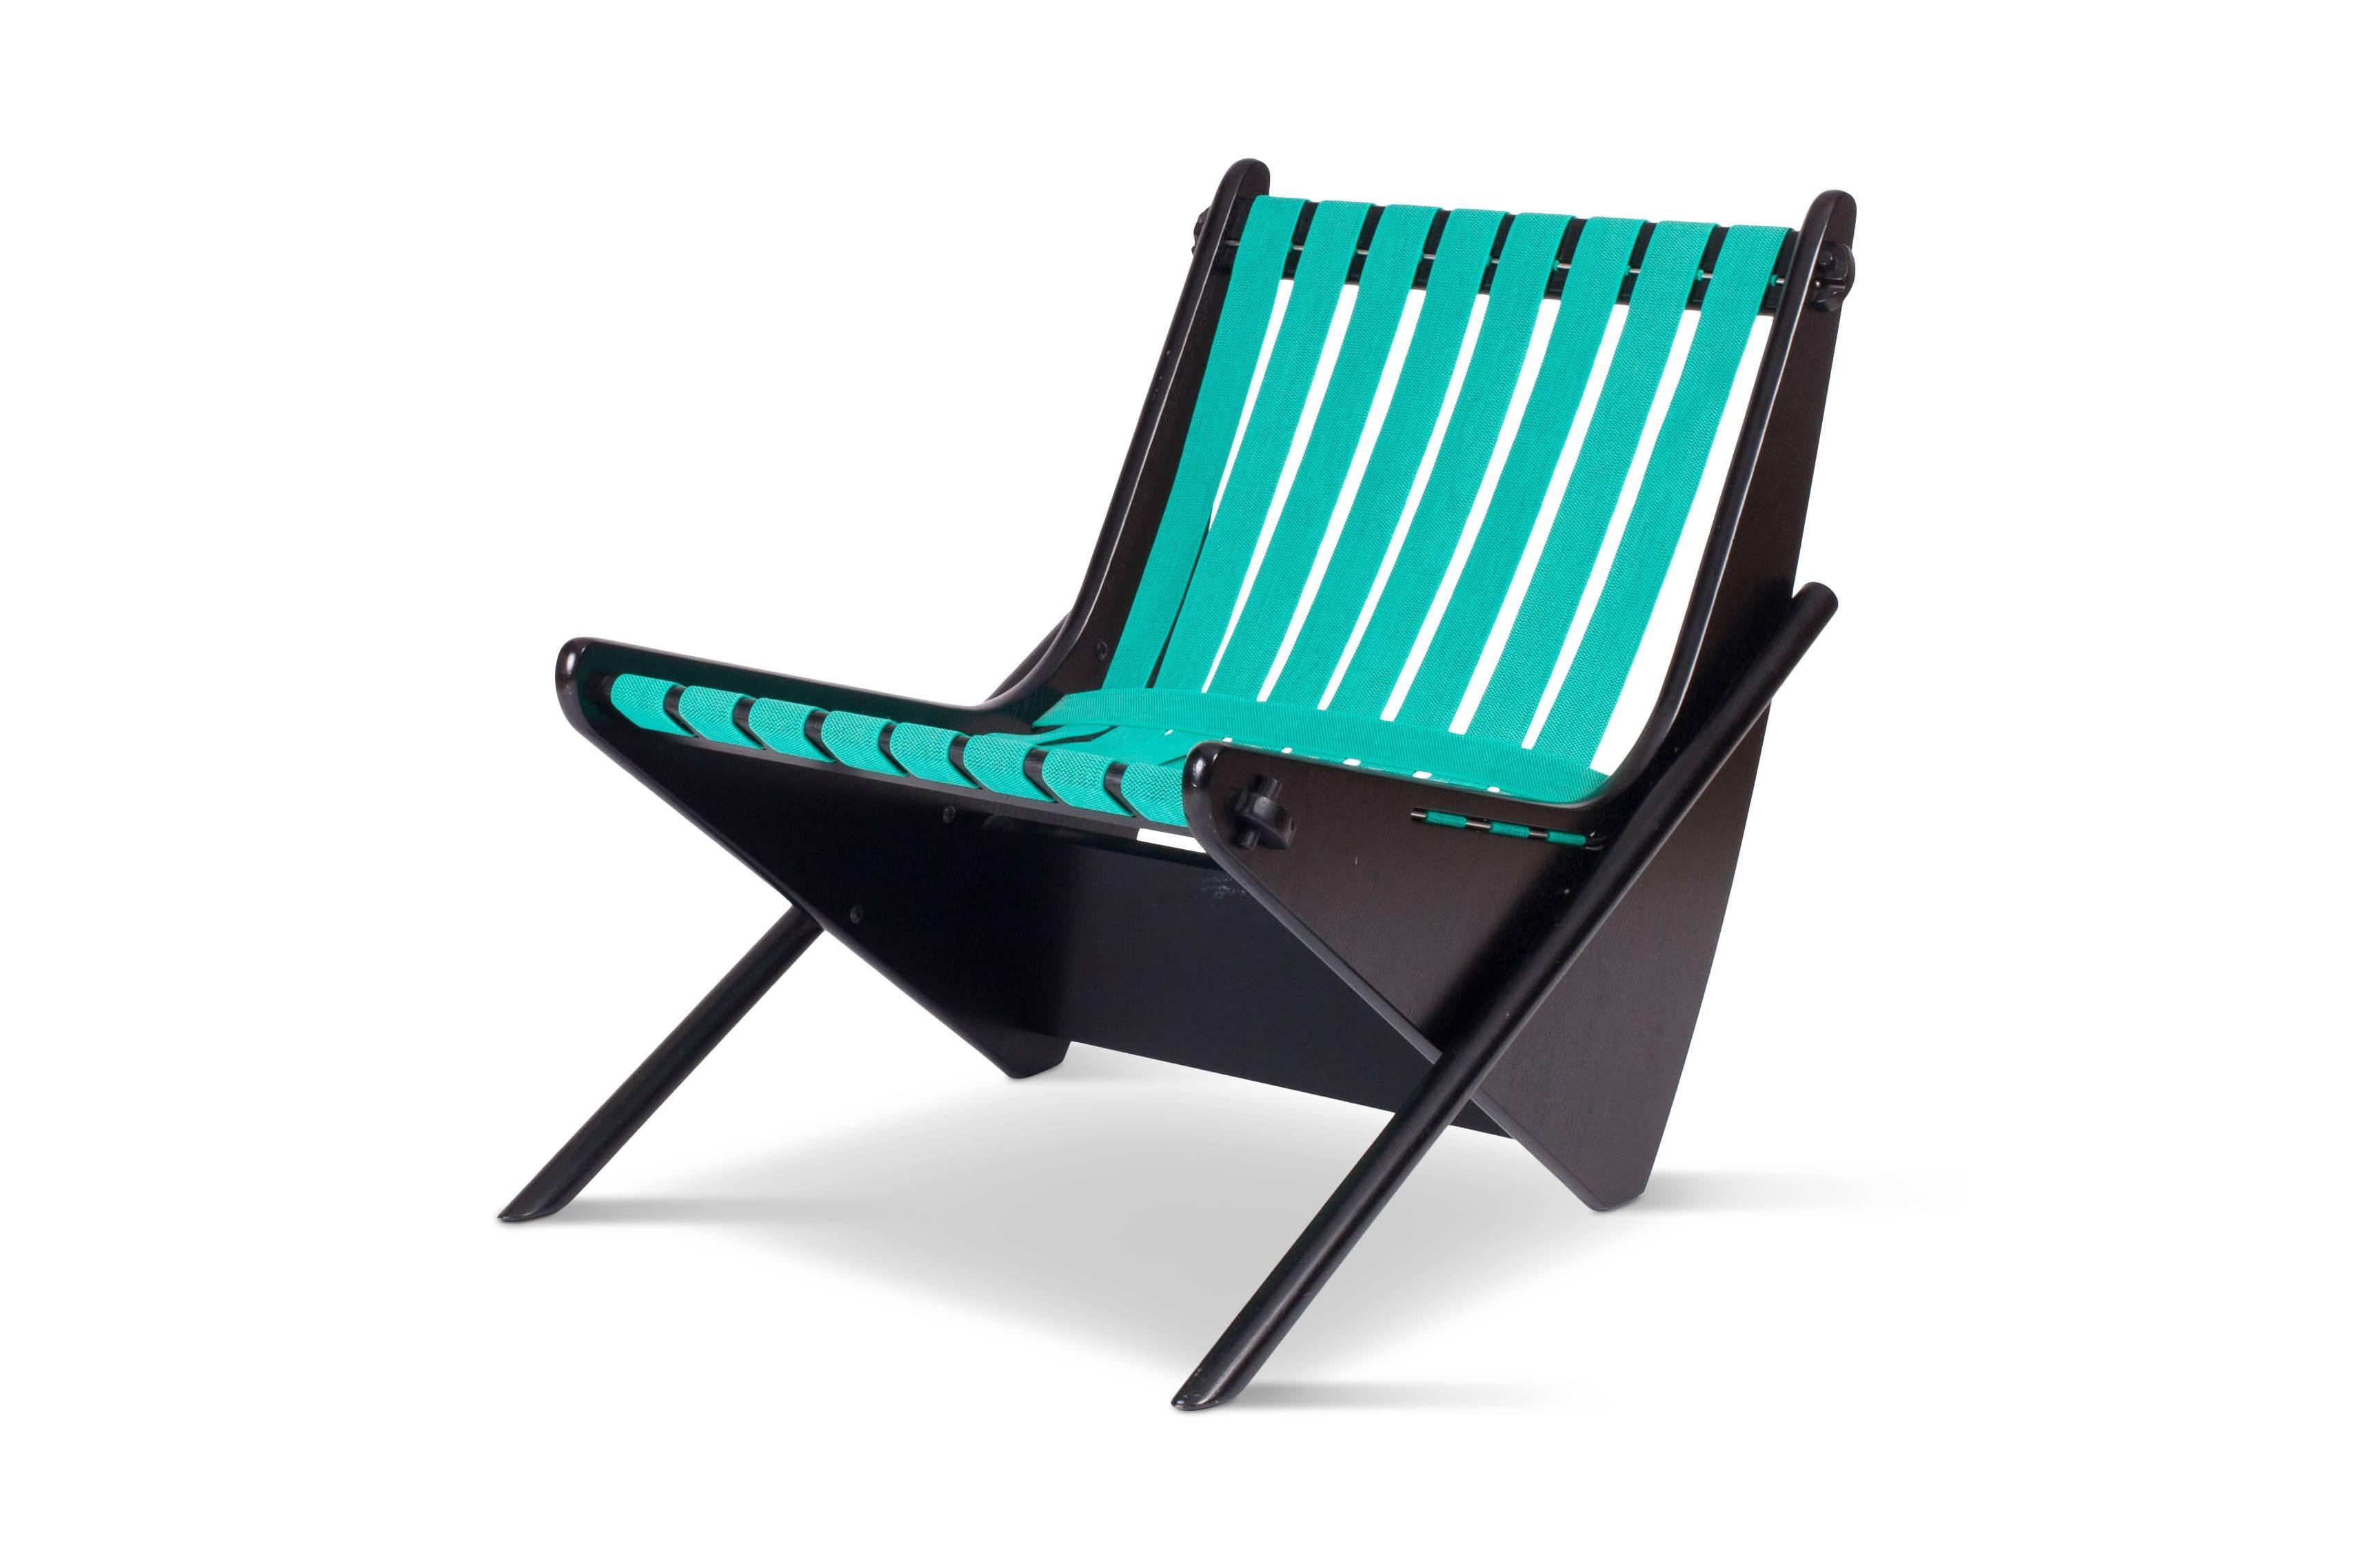 Mid-century modern Brazilian 'Boomerang' Lounge chair designed by Richard Neutra in the 1950s.
This limited edition chair was manufactured by Bona SRL Italy in the 1980s.

The black lacquered wooden frame holds a bright green webbing that
creates a